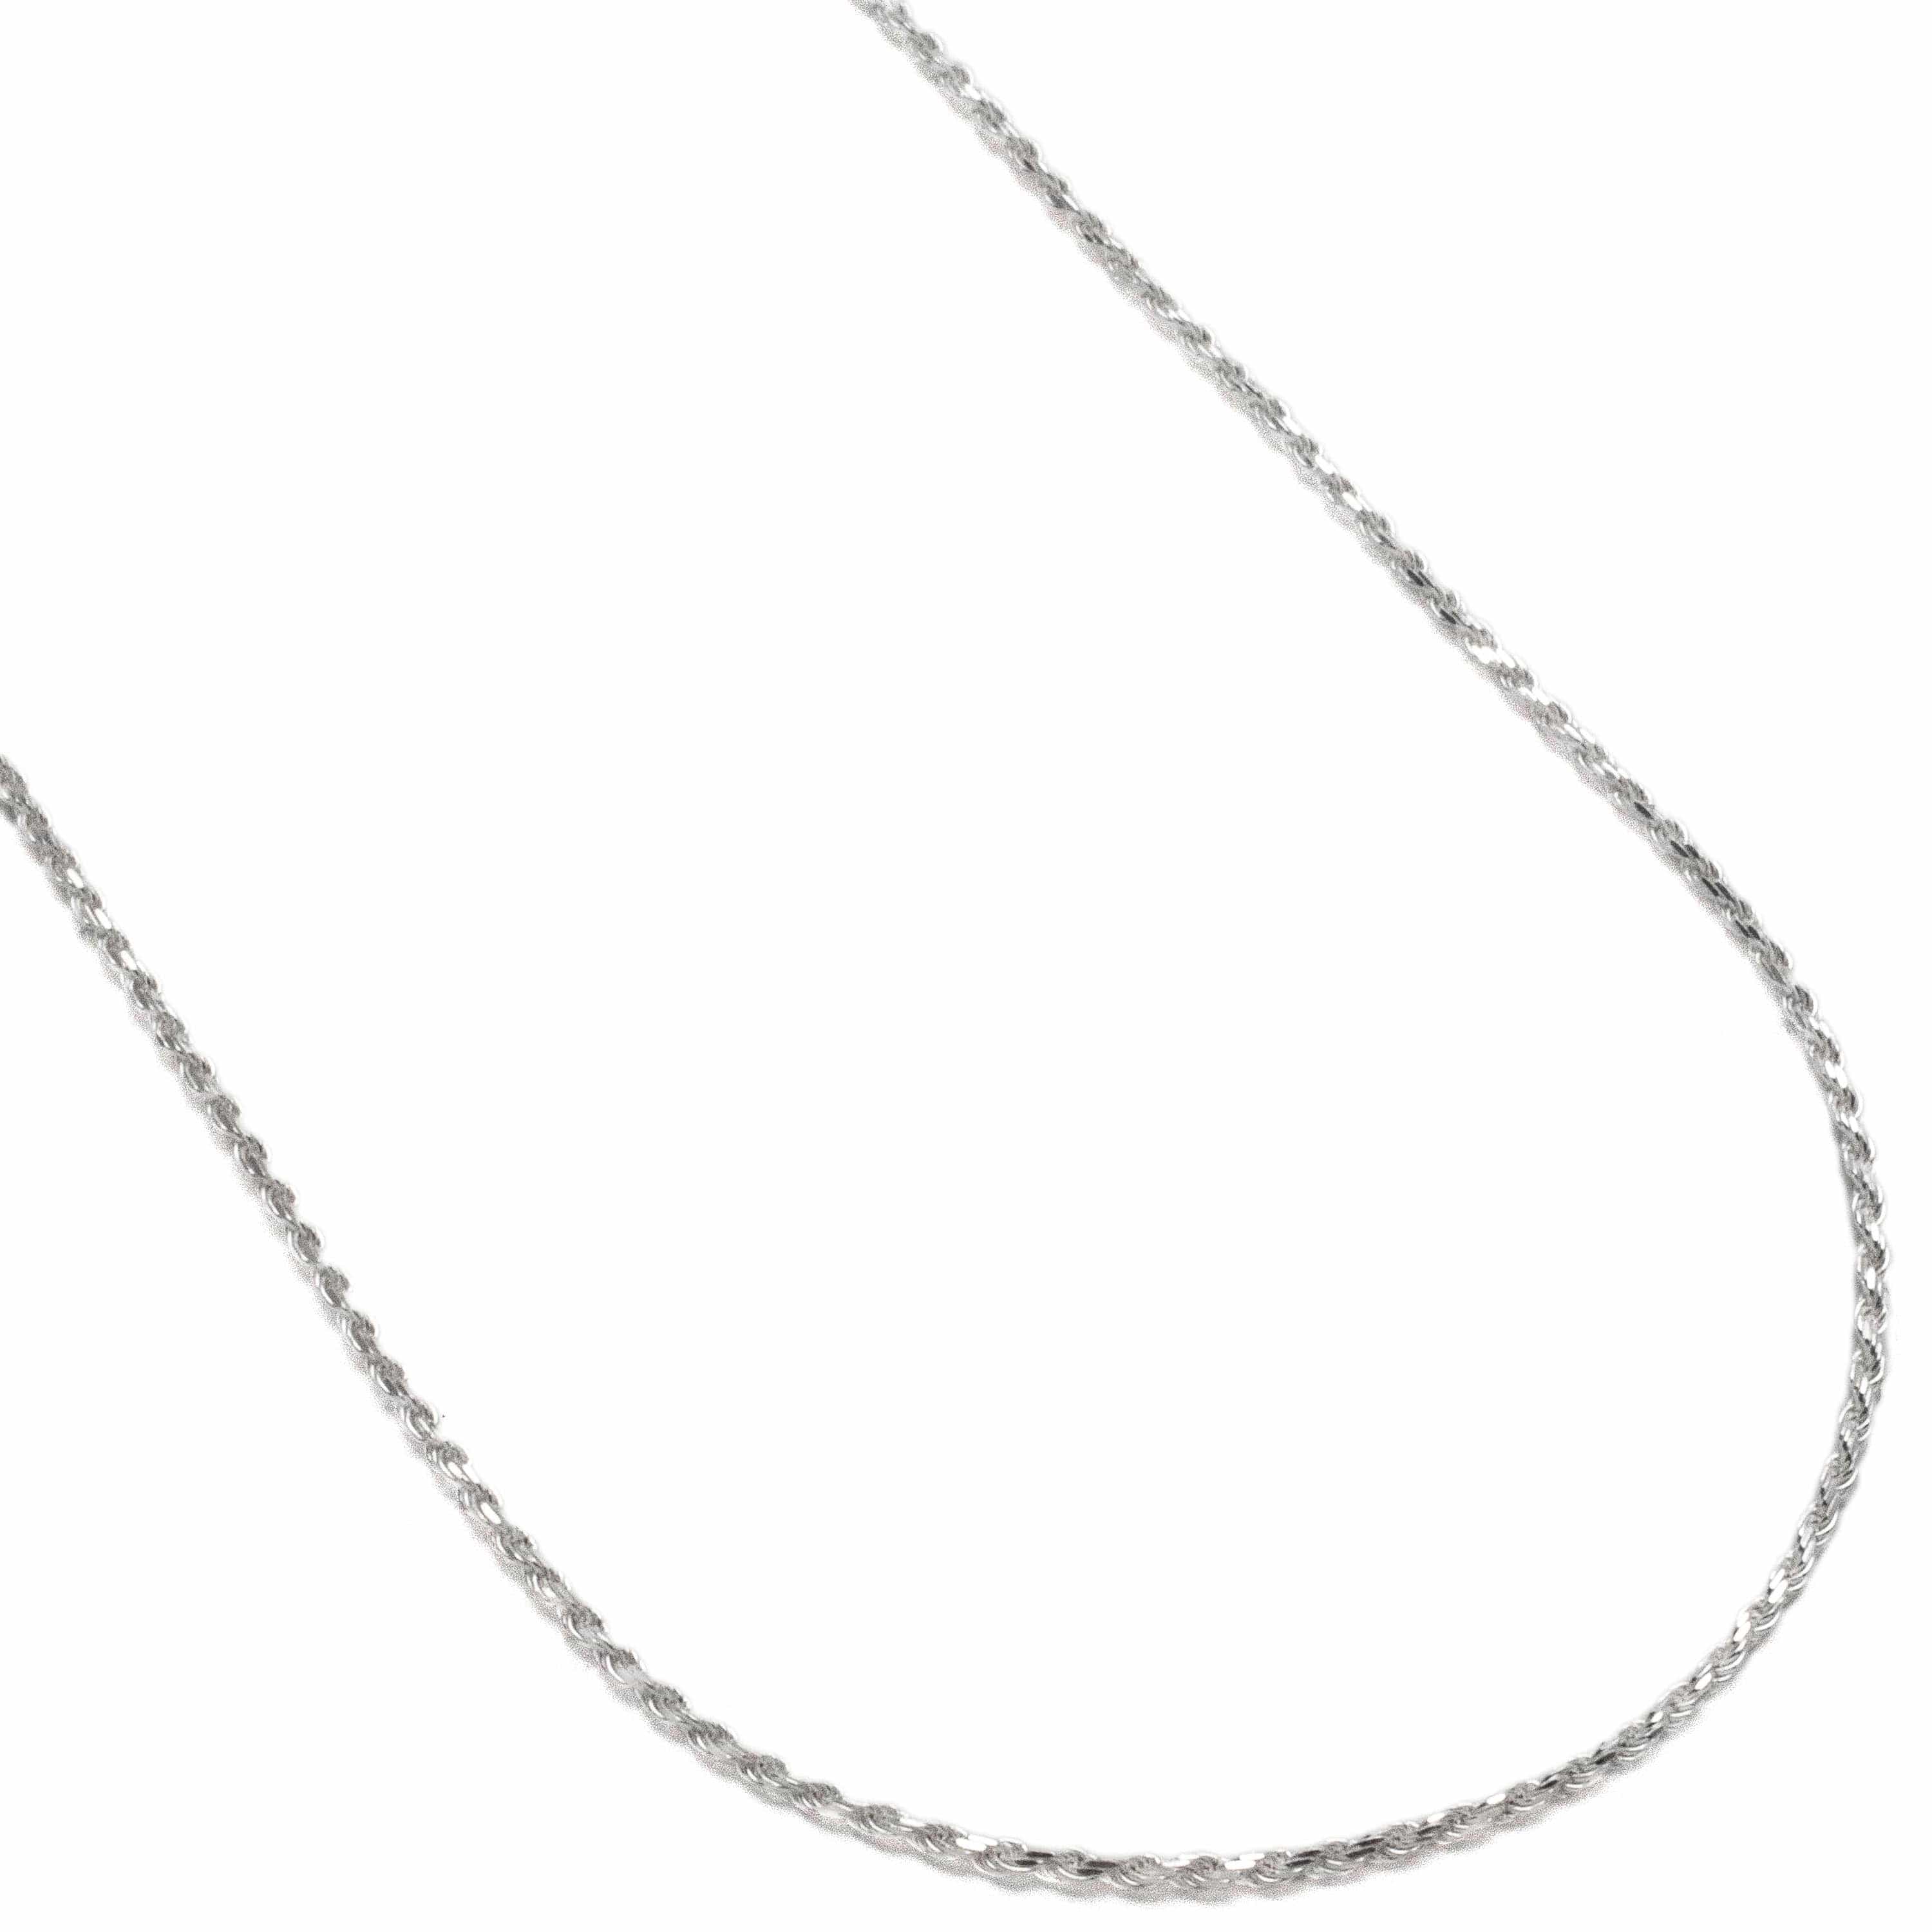 Kalifano Sterling Silver Chains 22" Italian Sterling Silver Twisted Rope Chain Necklace 1mm SCA-RP025-22